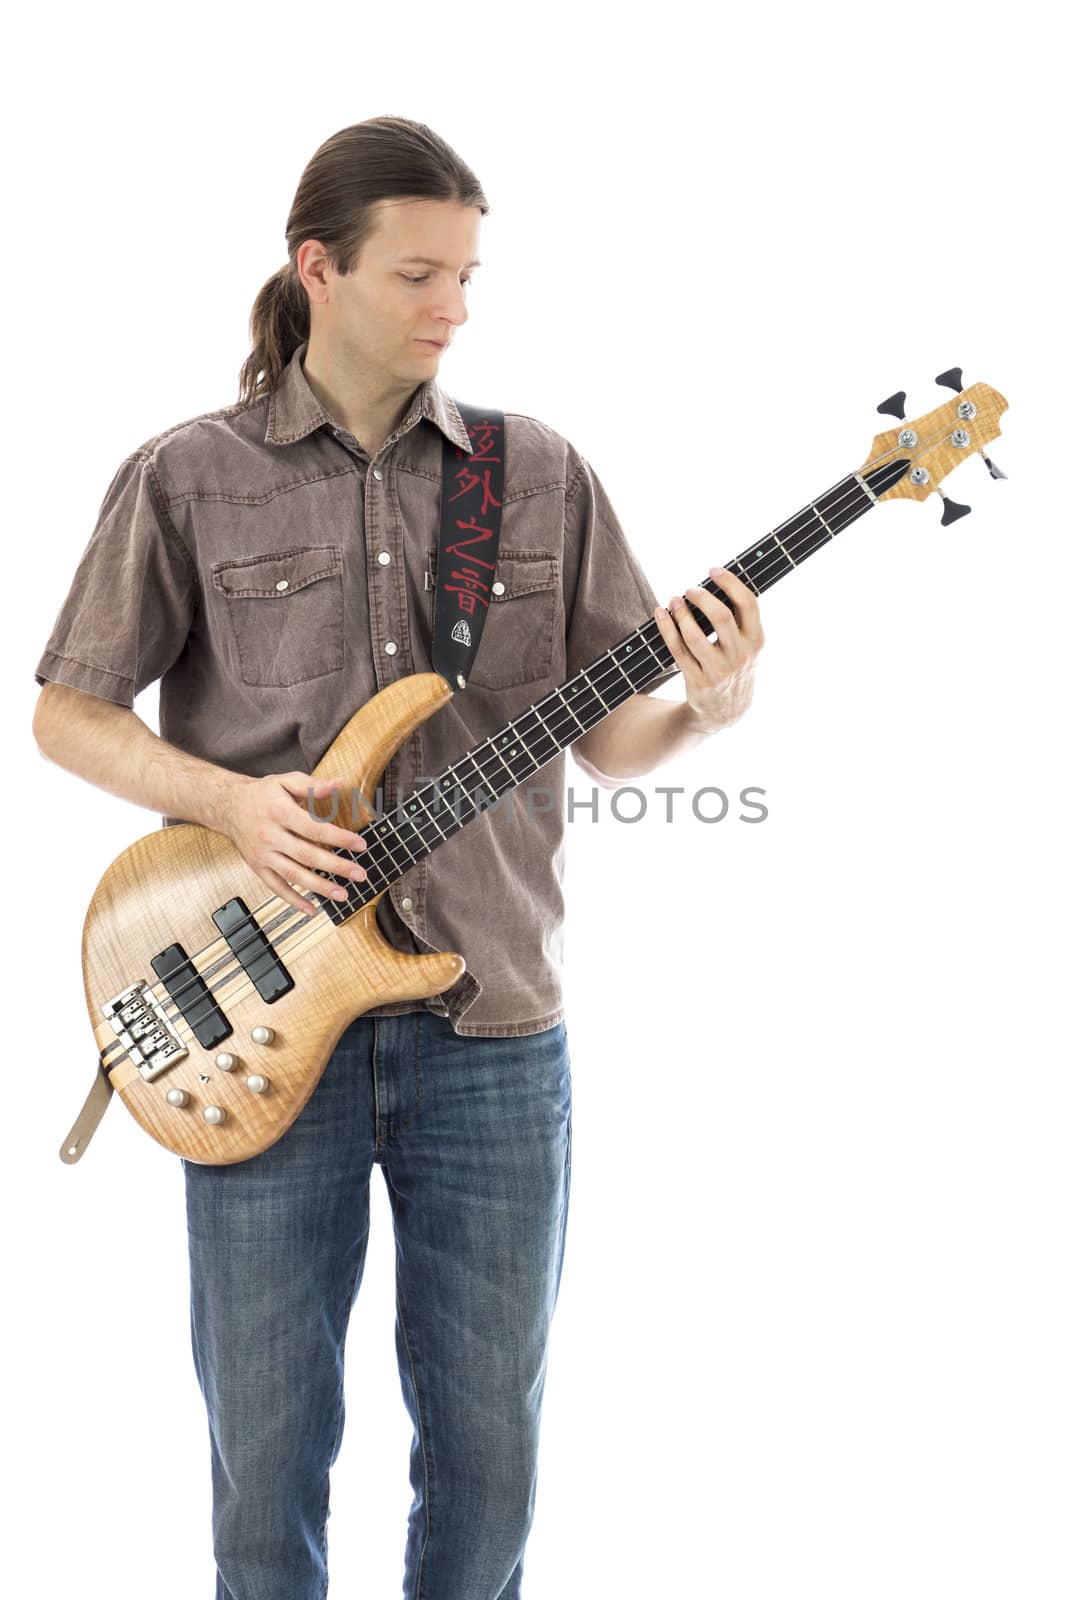 Bassist playing a bass, vertical view (Series with the same model available)